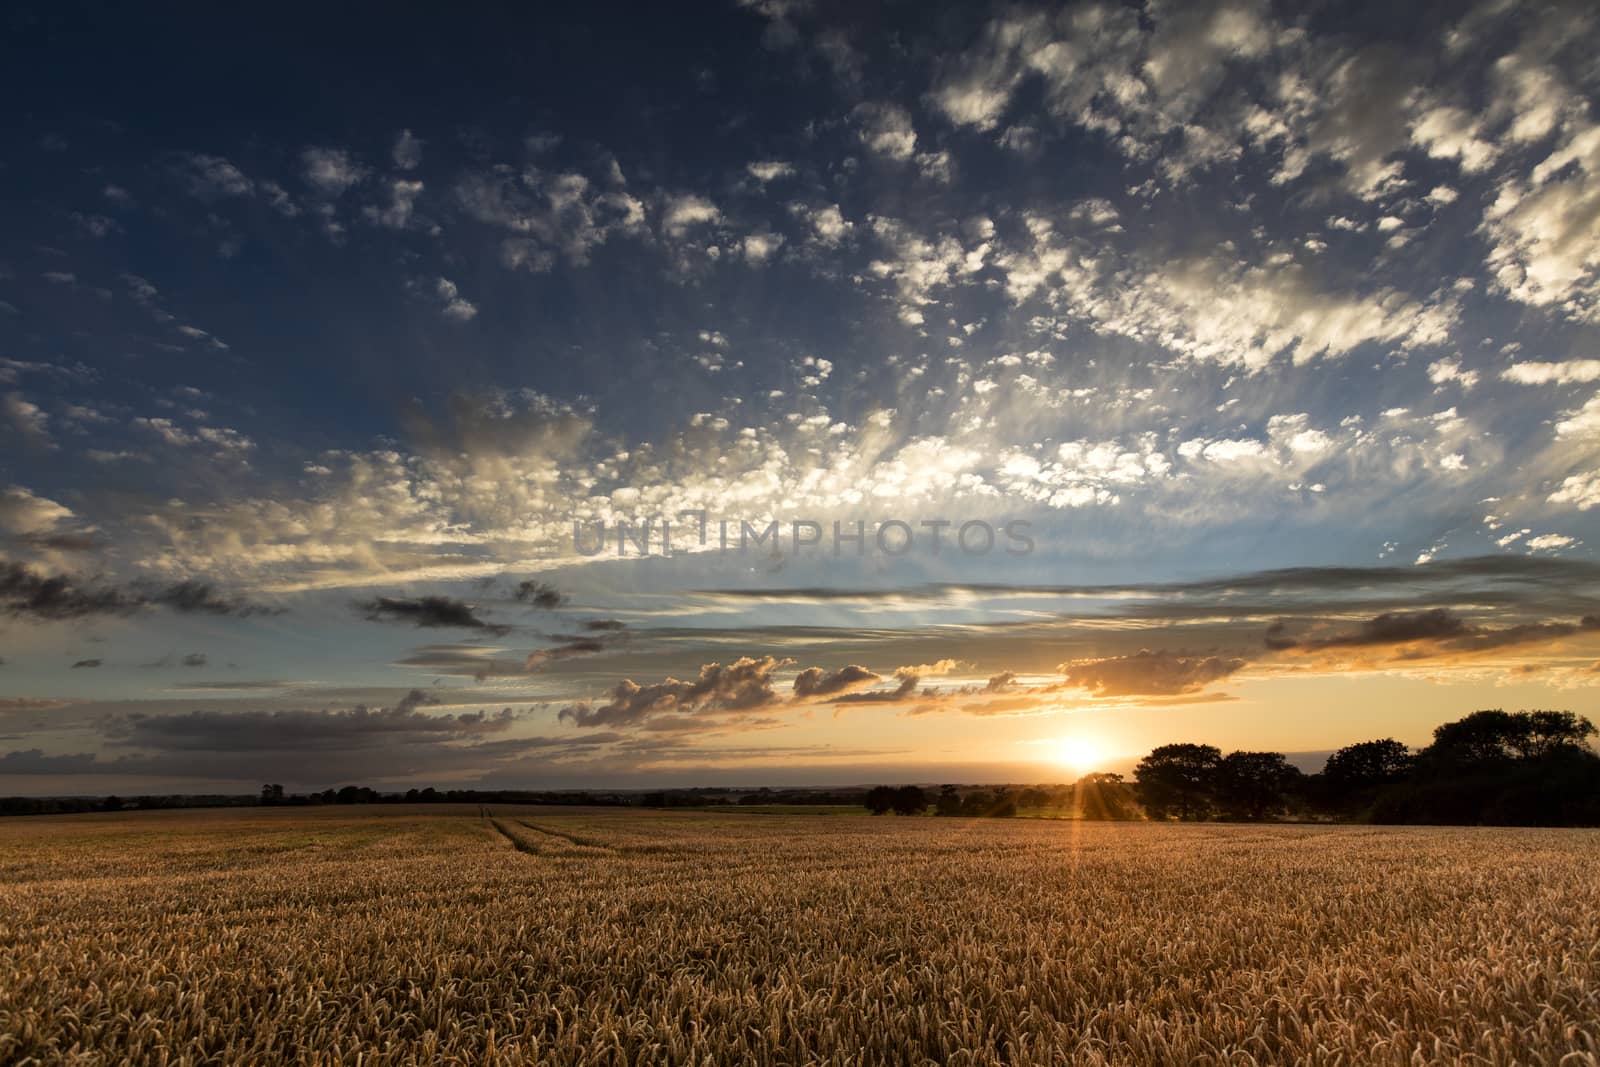 Near Caistor, Lincolnshire, UK, July 2017, View of Lincolnshire  by ElectricEggPhoto